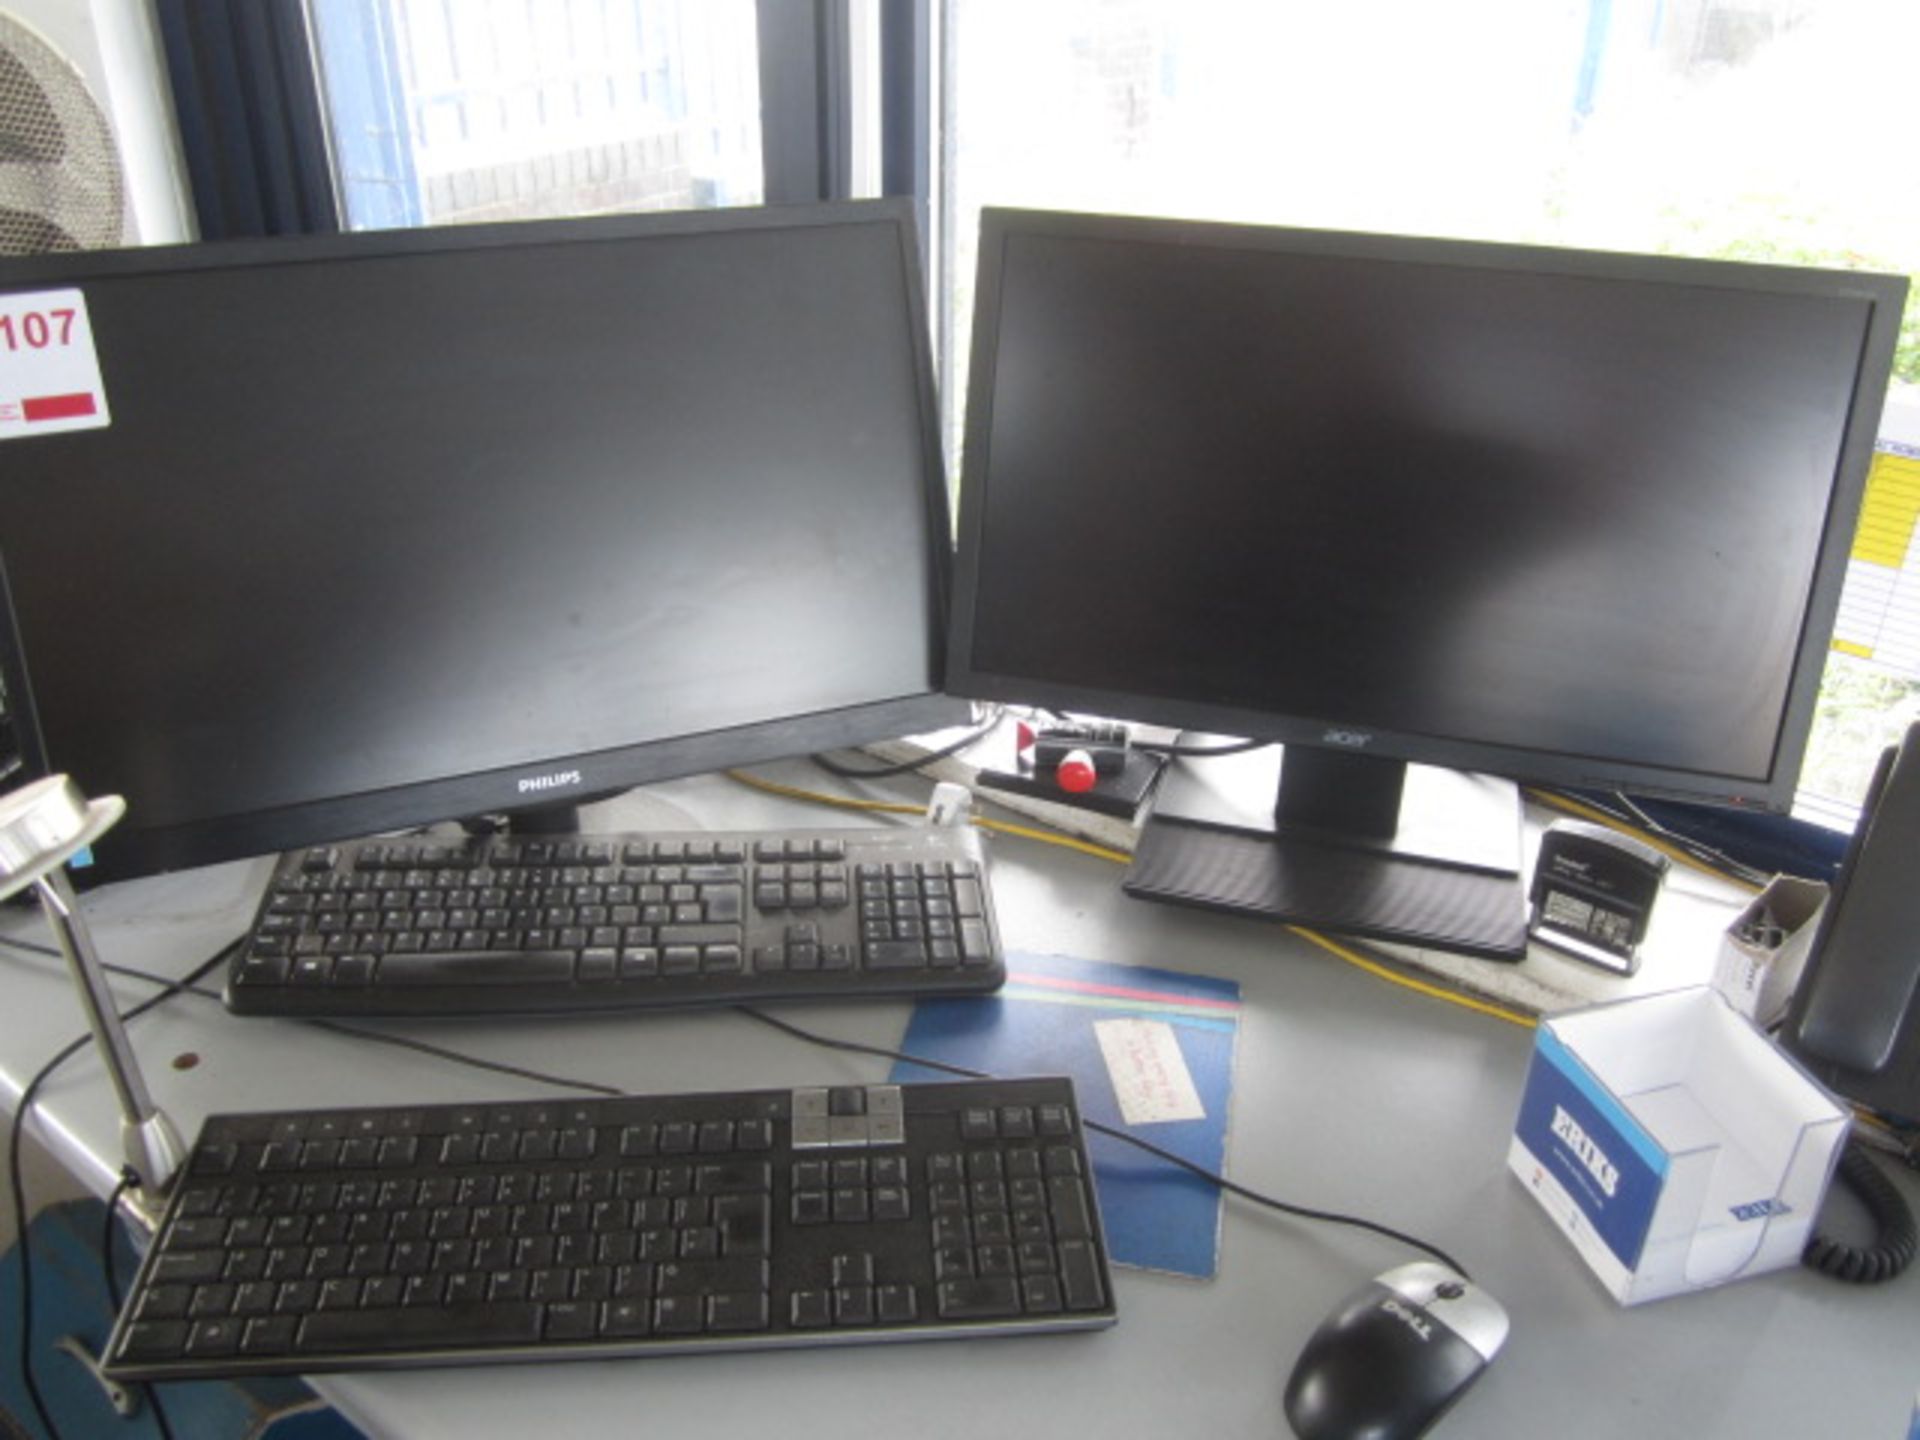 Two Dell Optiplex 790 computer system, two flat screen monitors, two keyboards, two mouse, Cisco